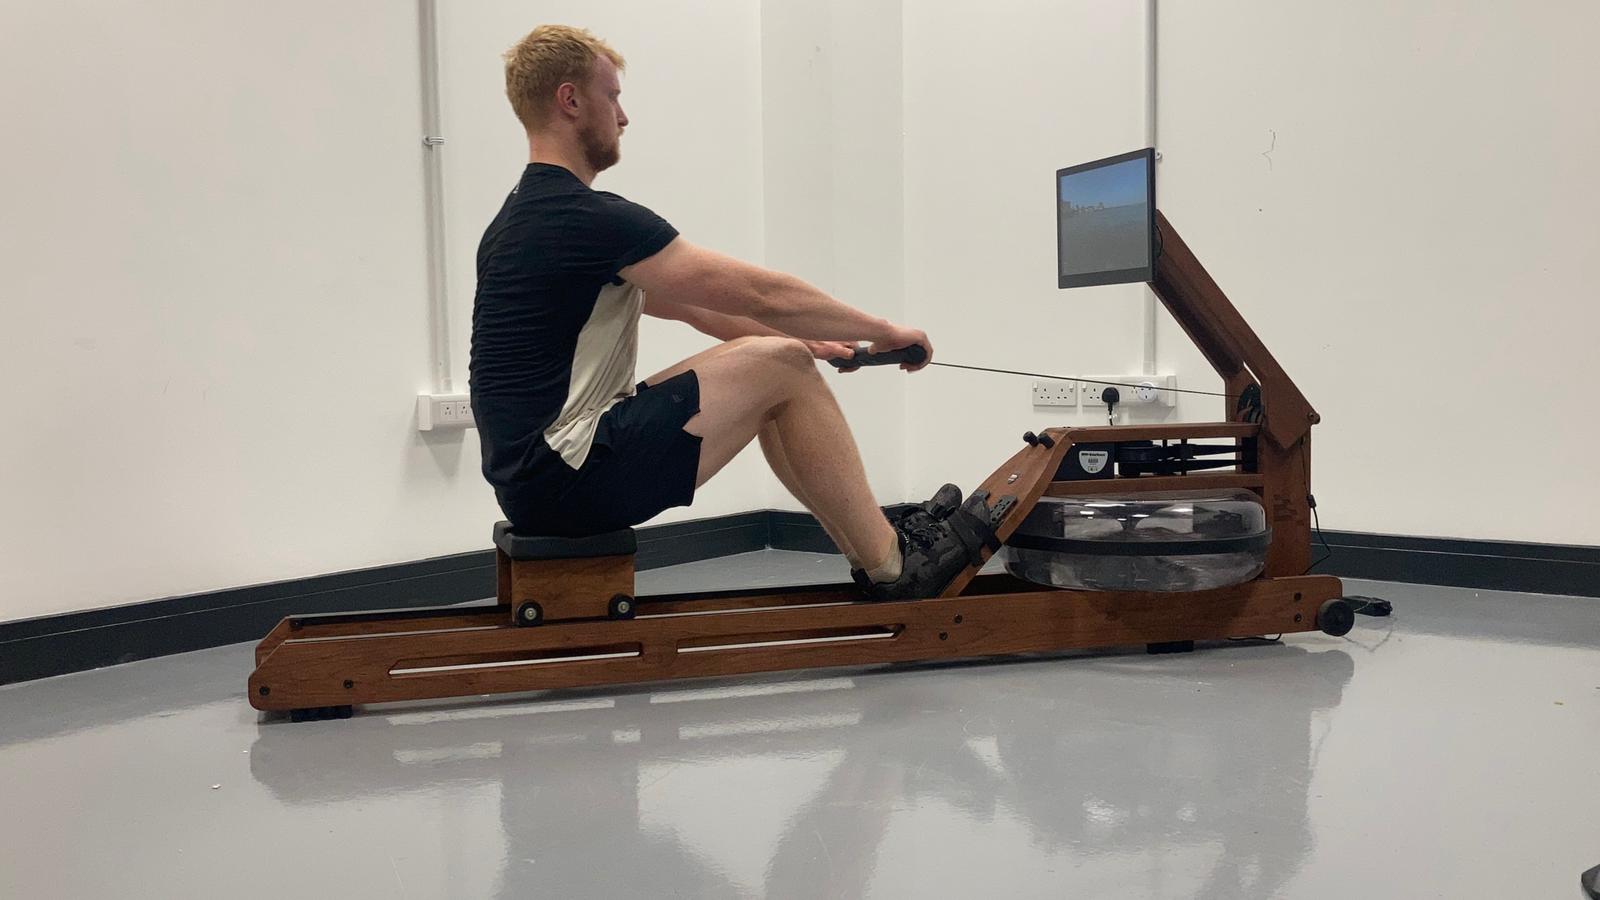 The Ergatta Rower is tested by a Live Science writer